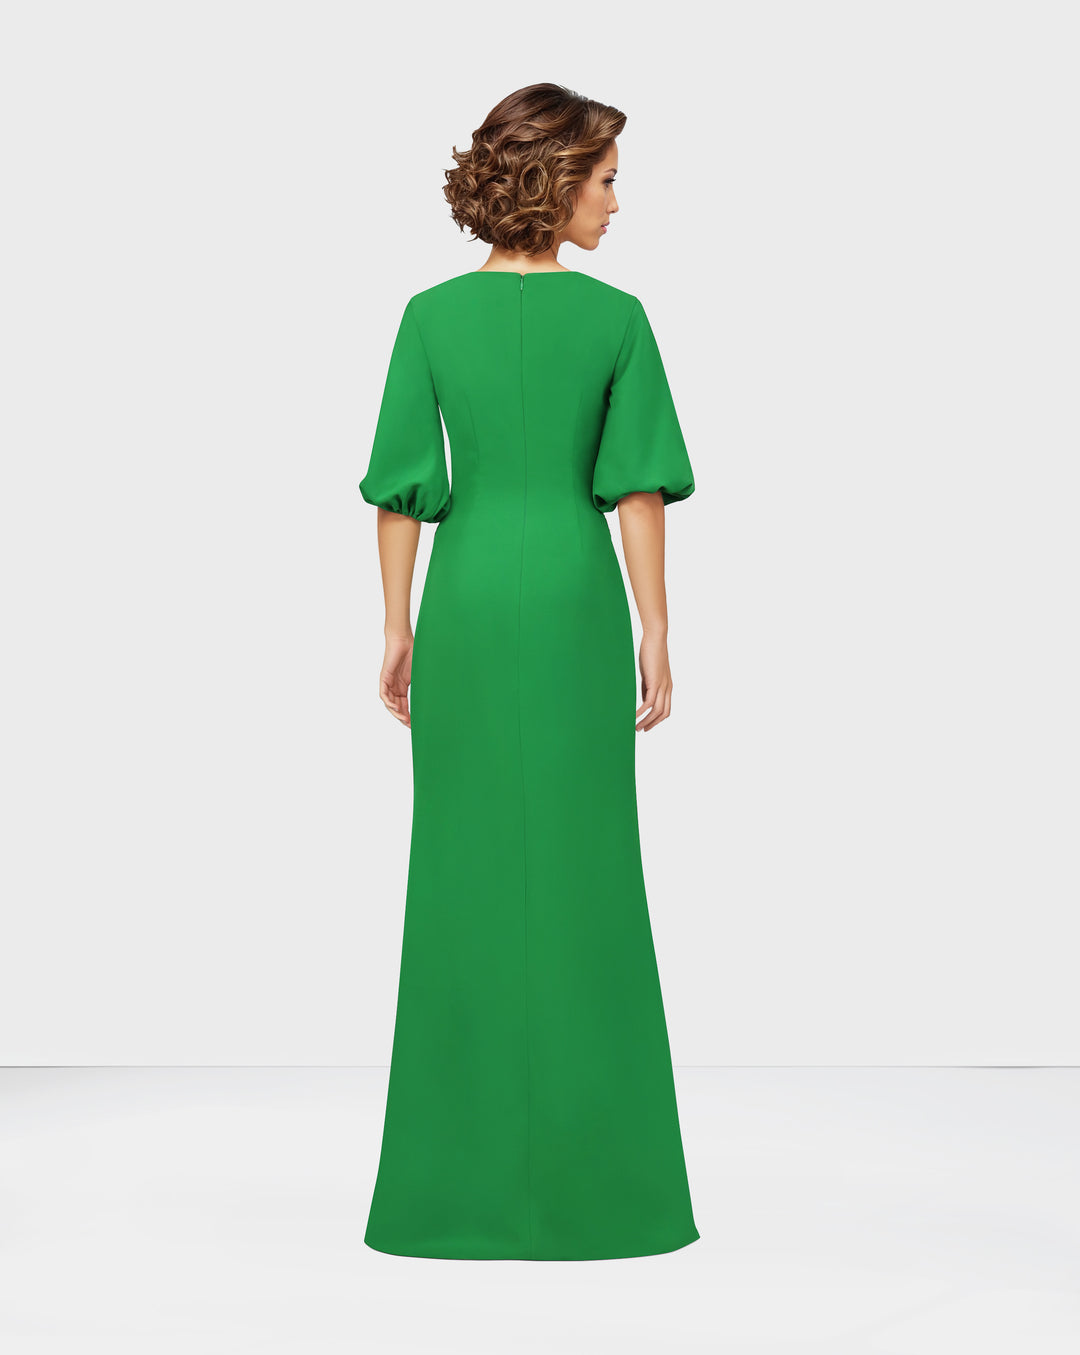 ⁠Beaded column dress with puffed sleeves and side slit